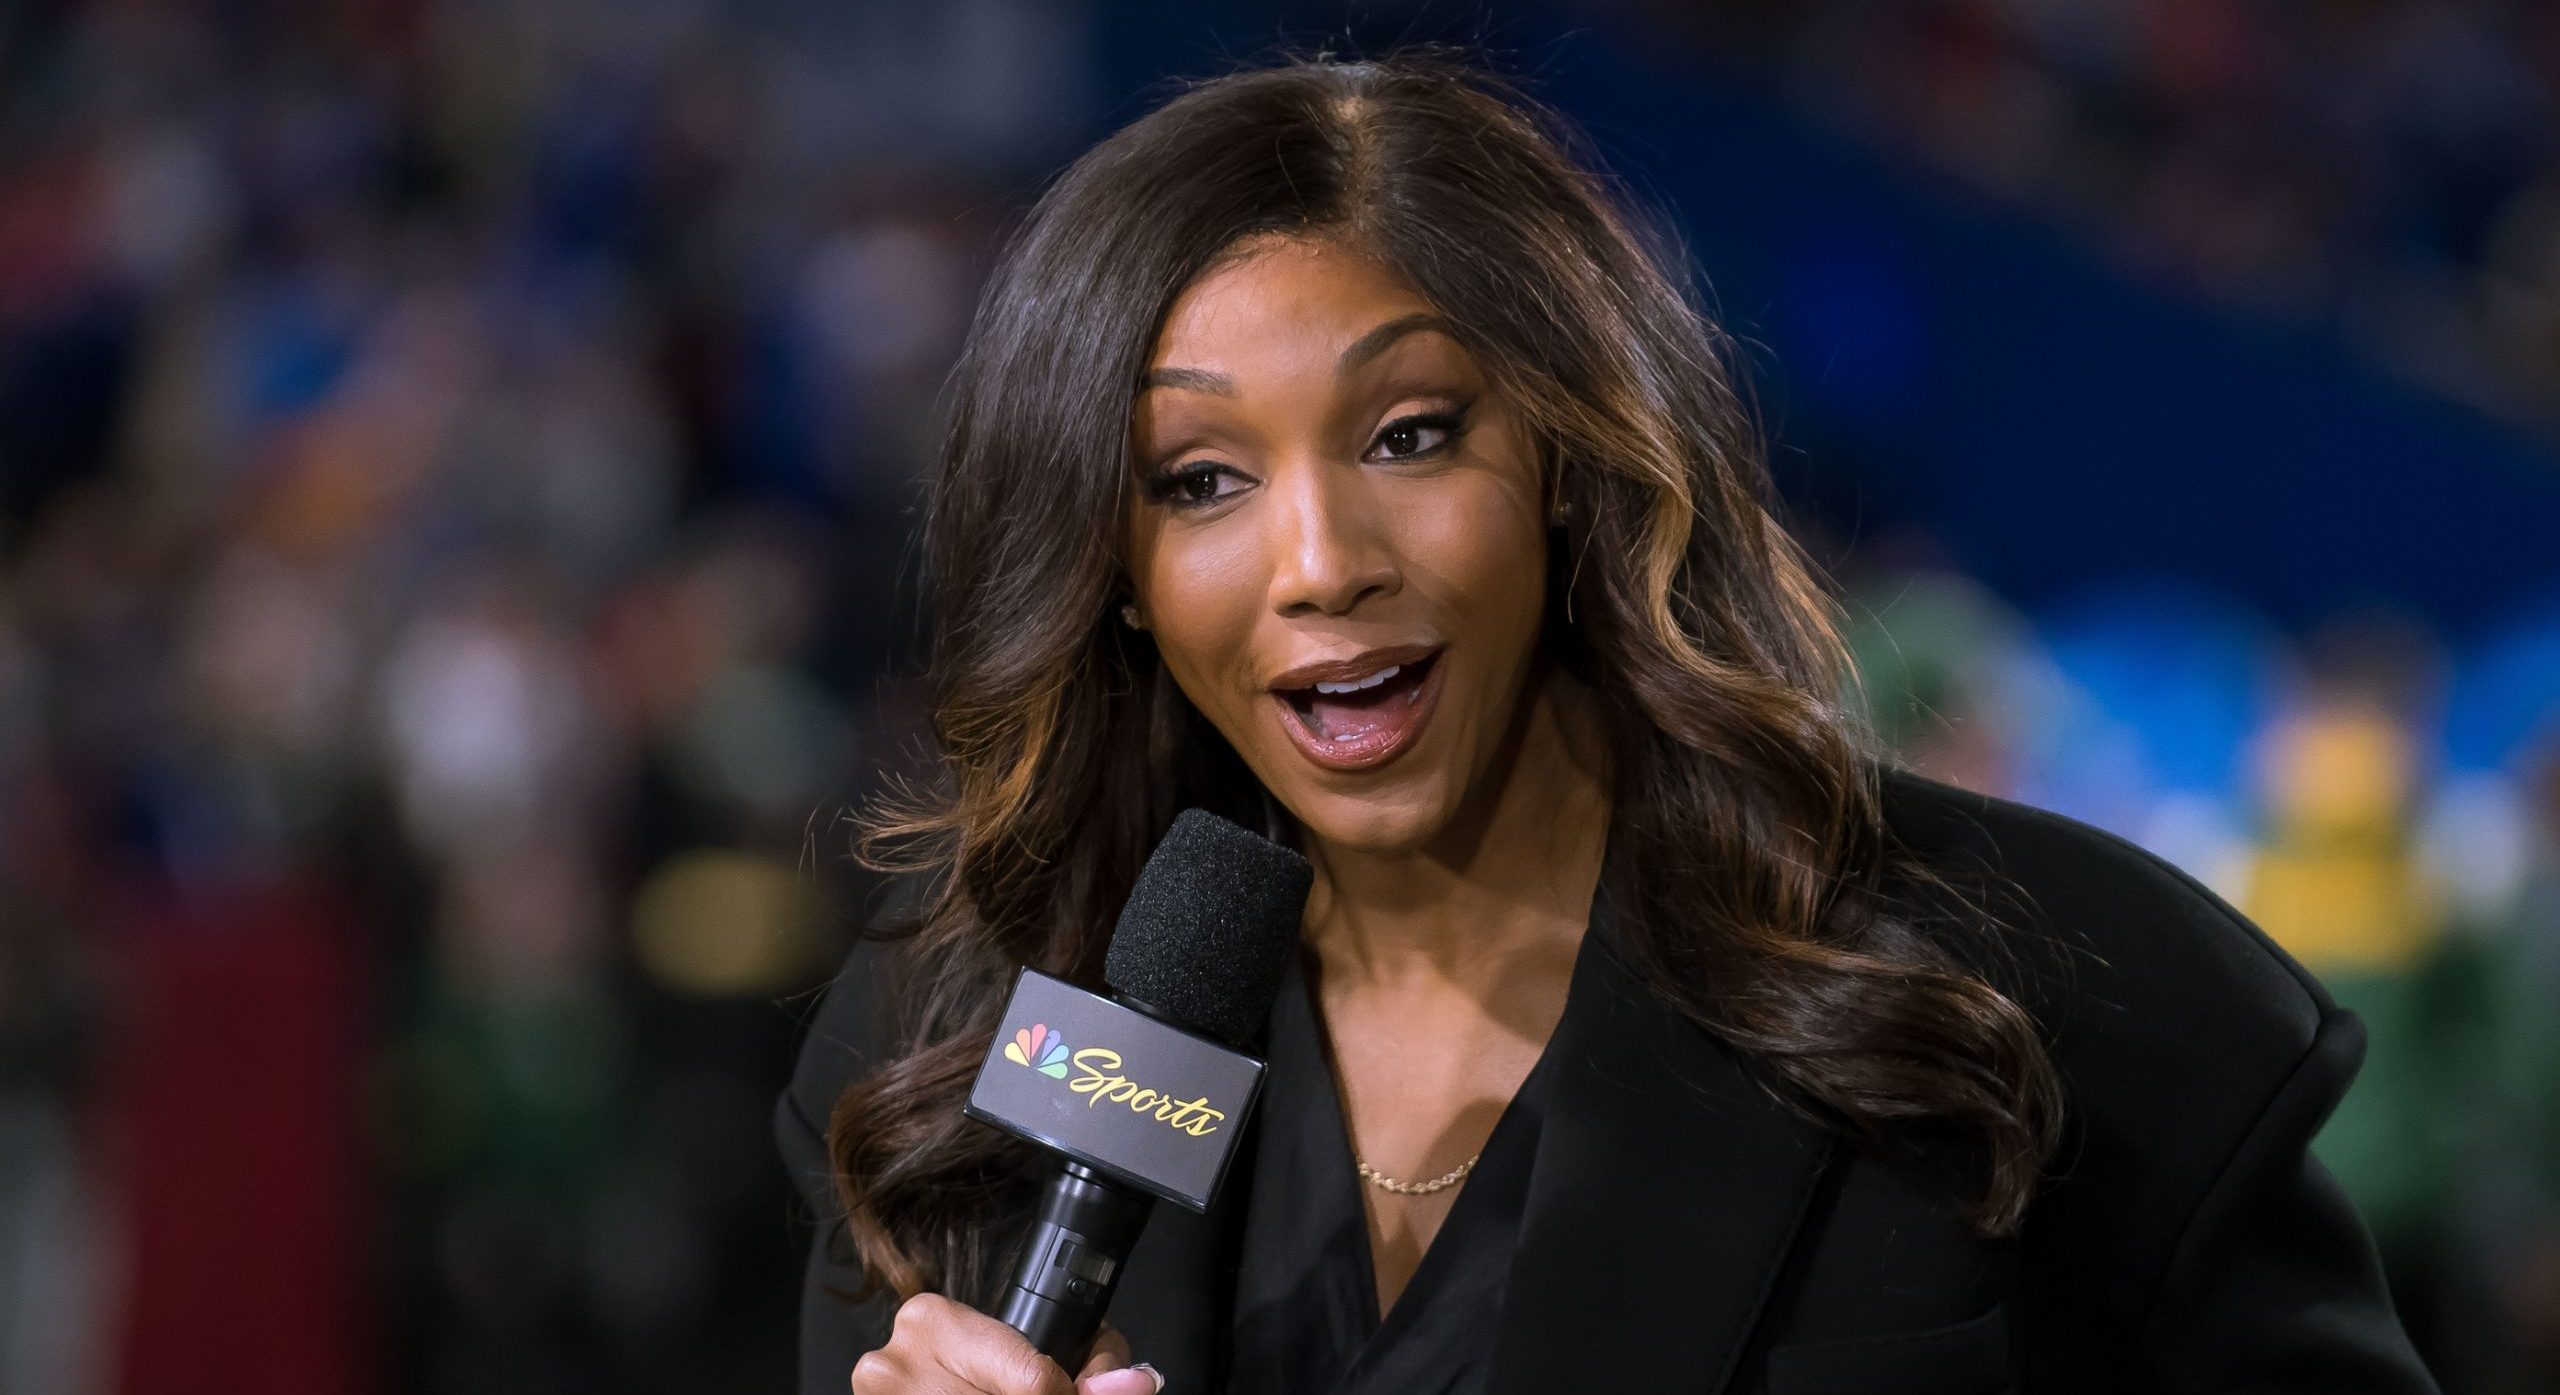 NBC Sports commentator Maria Taylor on camera up before a game between the Buffalo Bills and the Green Bay Packers.